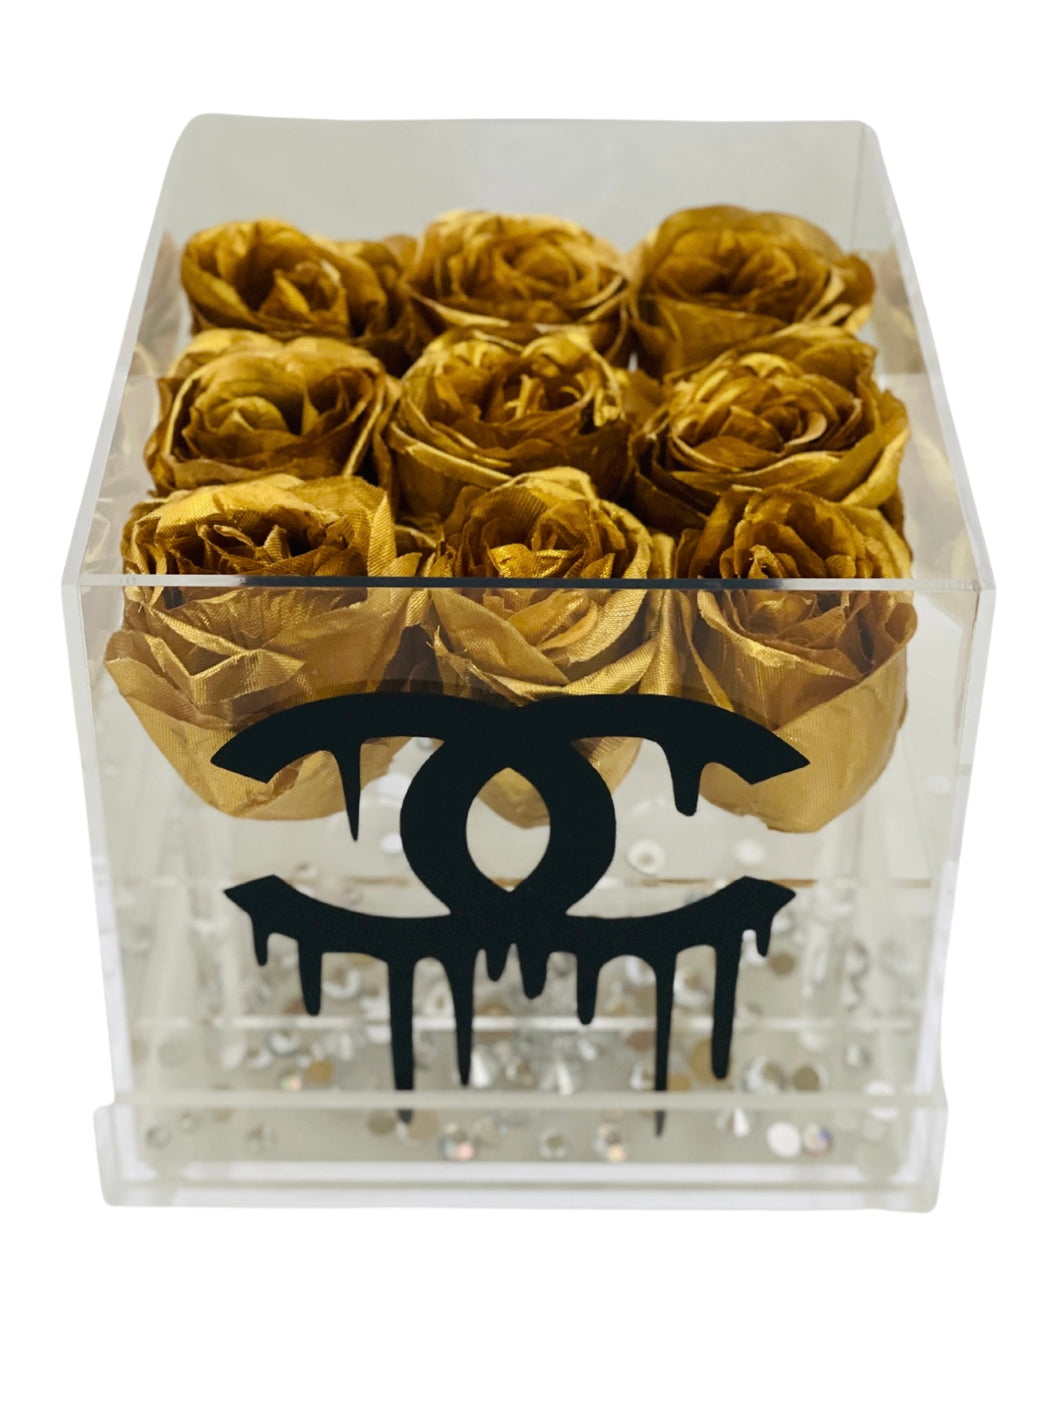 Acrylic Flower Box with Gold Roses